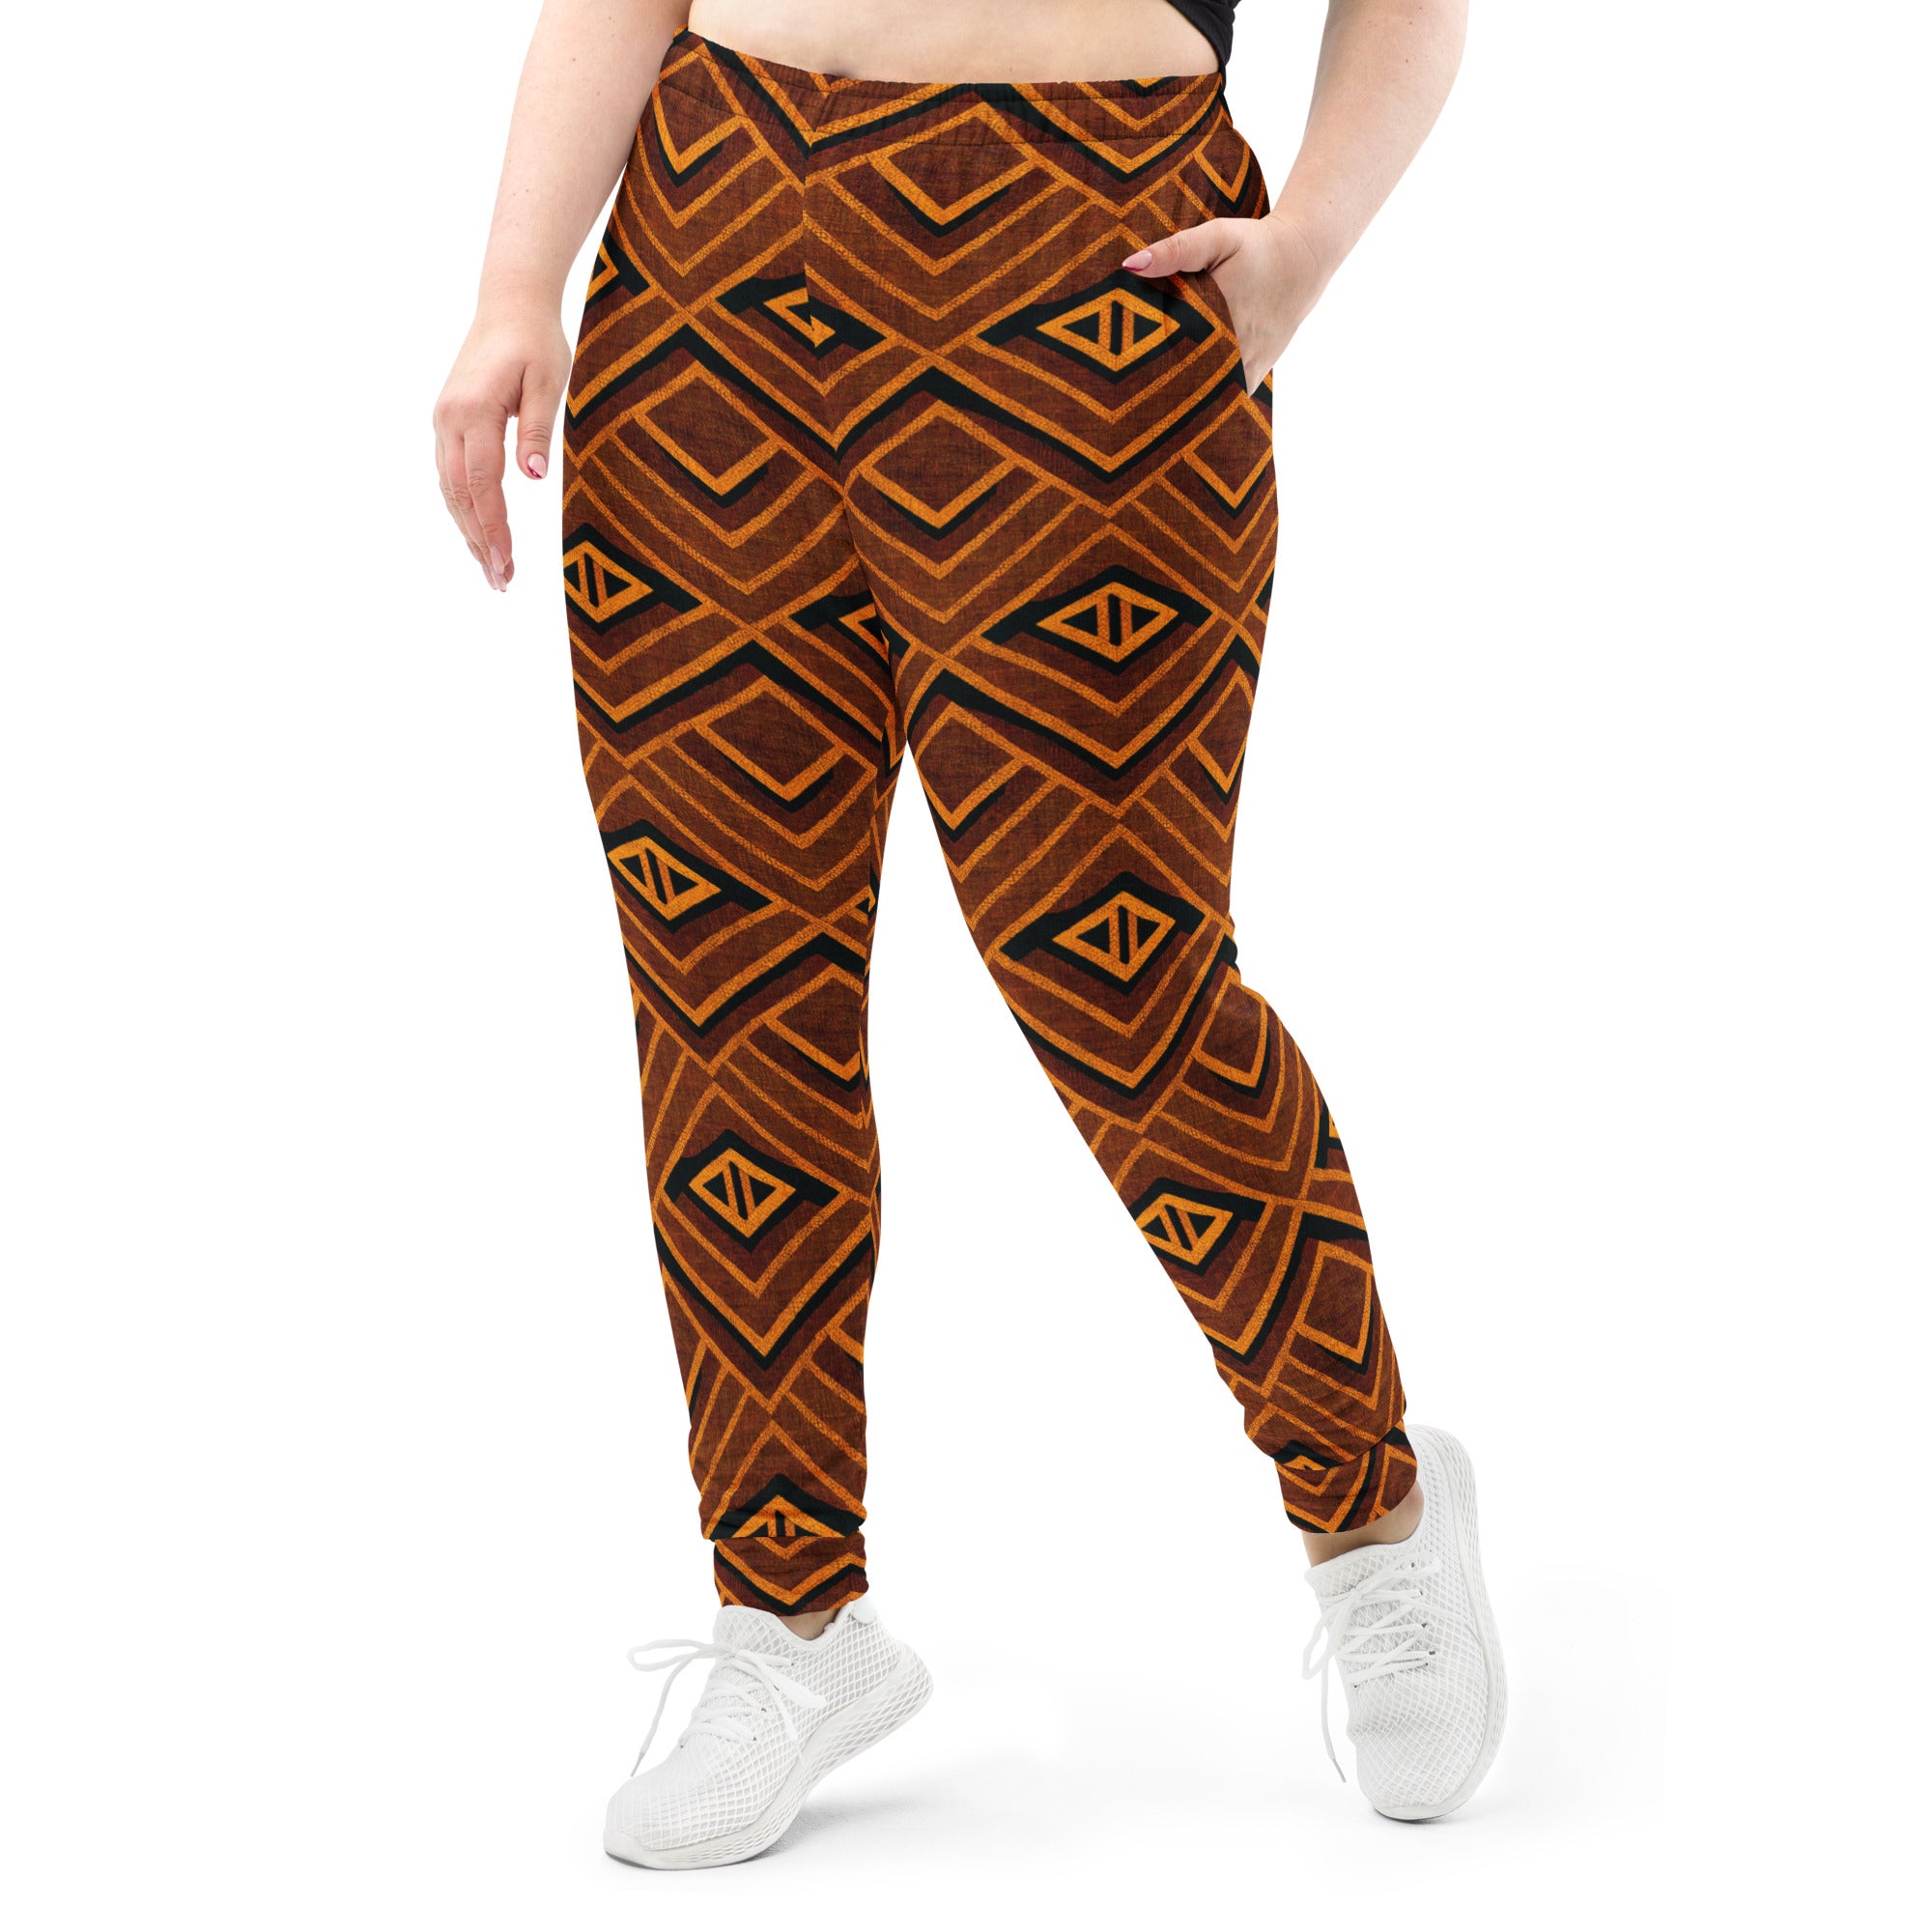 Back to Africa Women's Joggers